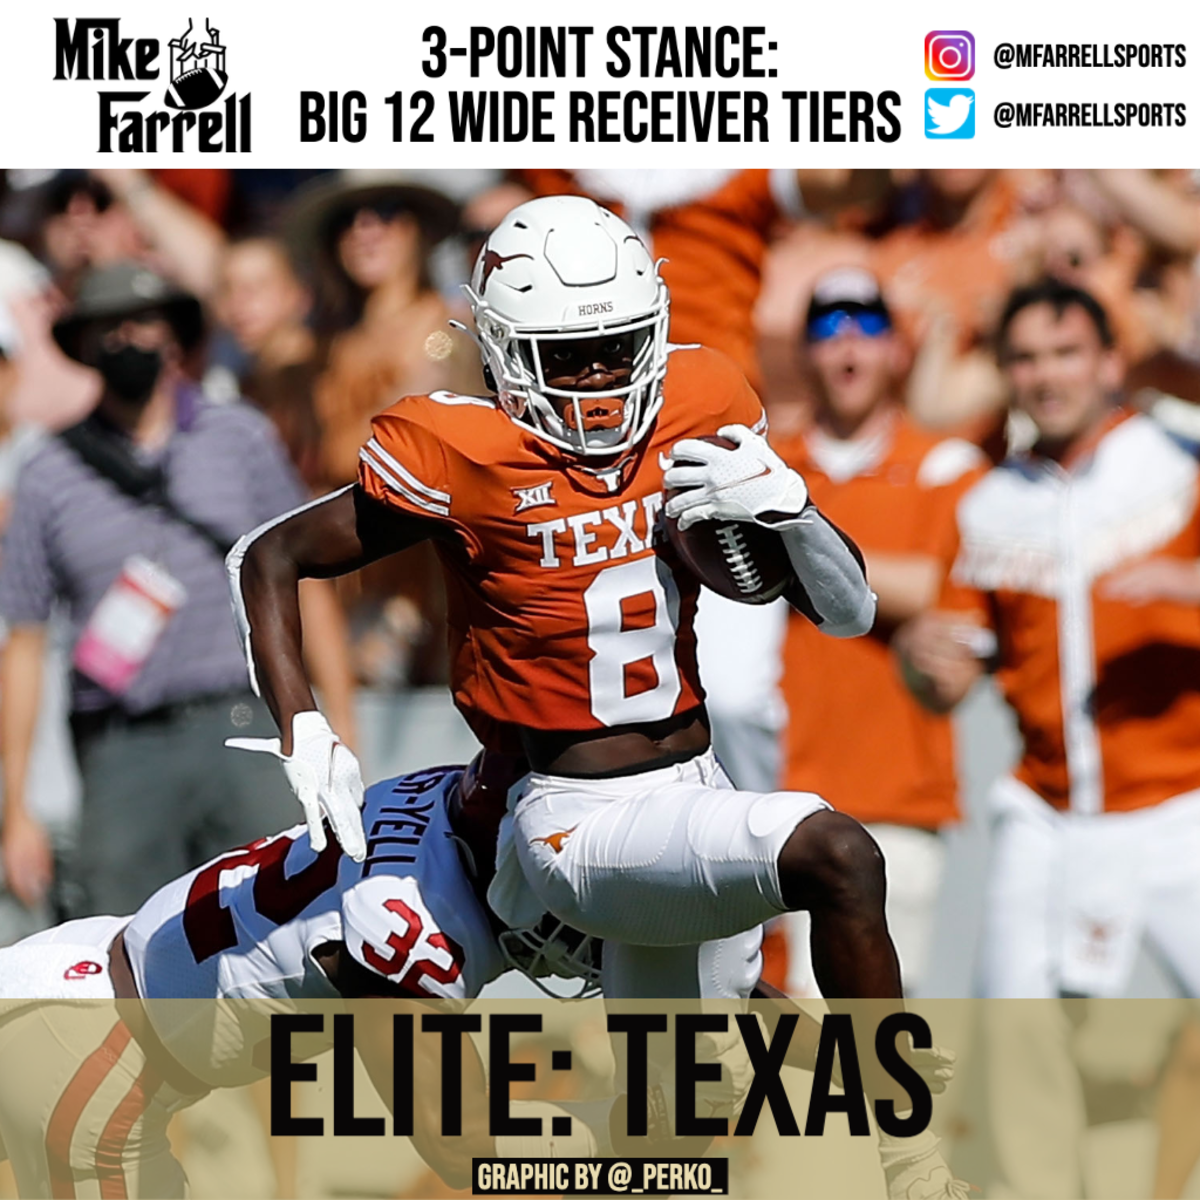 3-Point Stance - Big 12 Wide Receiver Tiers